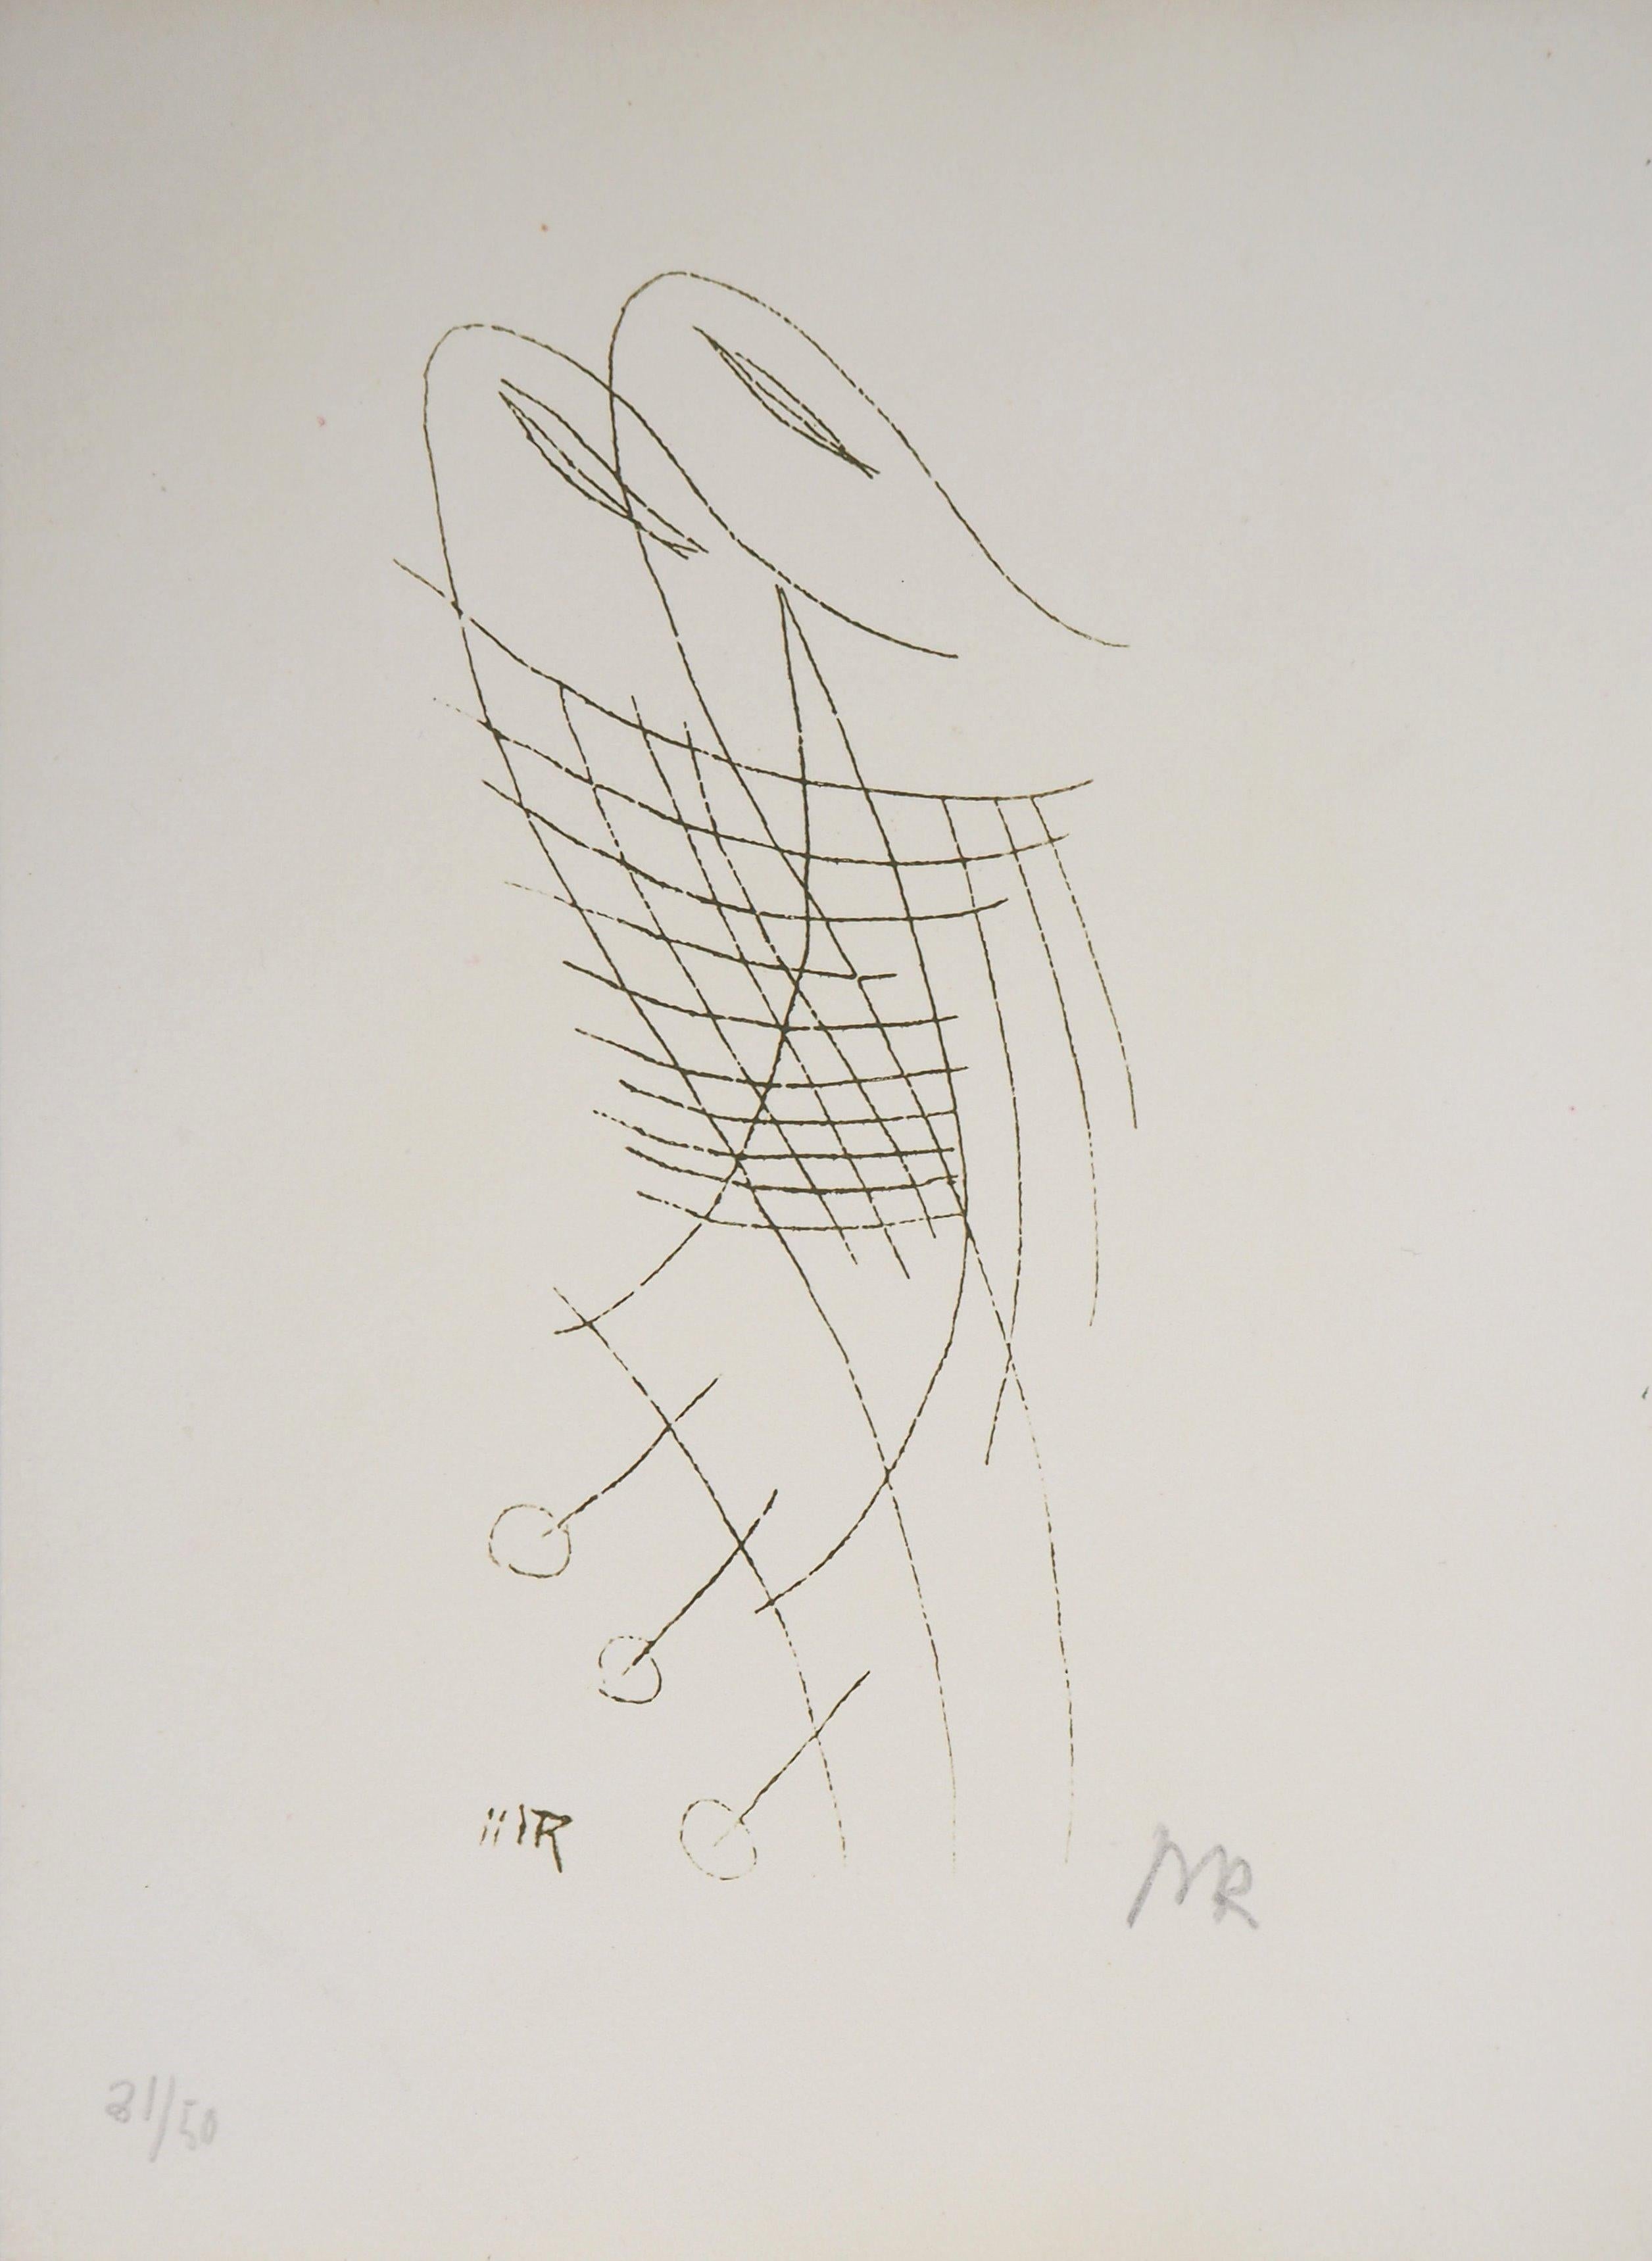 Man Ray Abstract Print - Oneiric Couple, Lydie, 1969 - Original Handsigned Etching